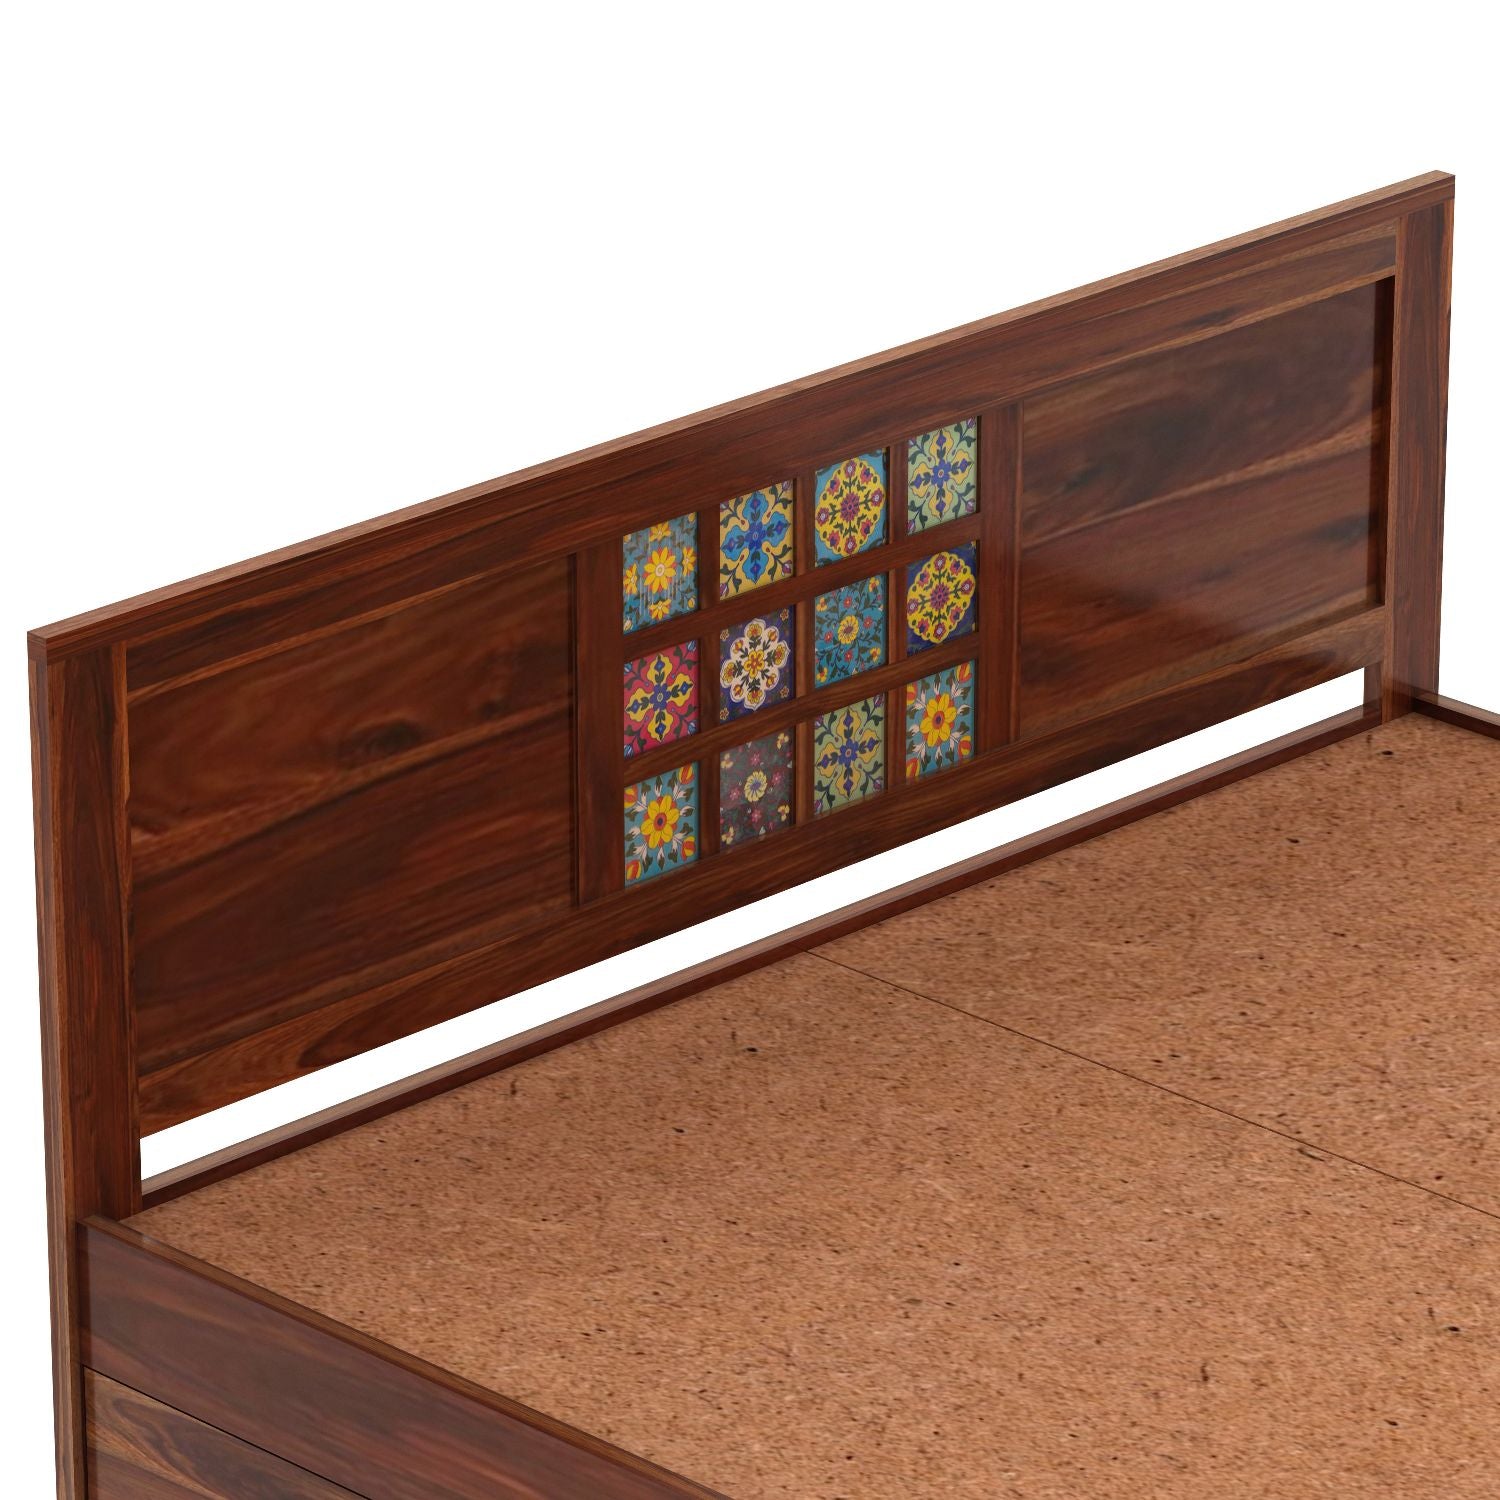 Dotwork Solid Sheesham Wood Bed With Four Drawers (King Size, Natural Finish)